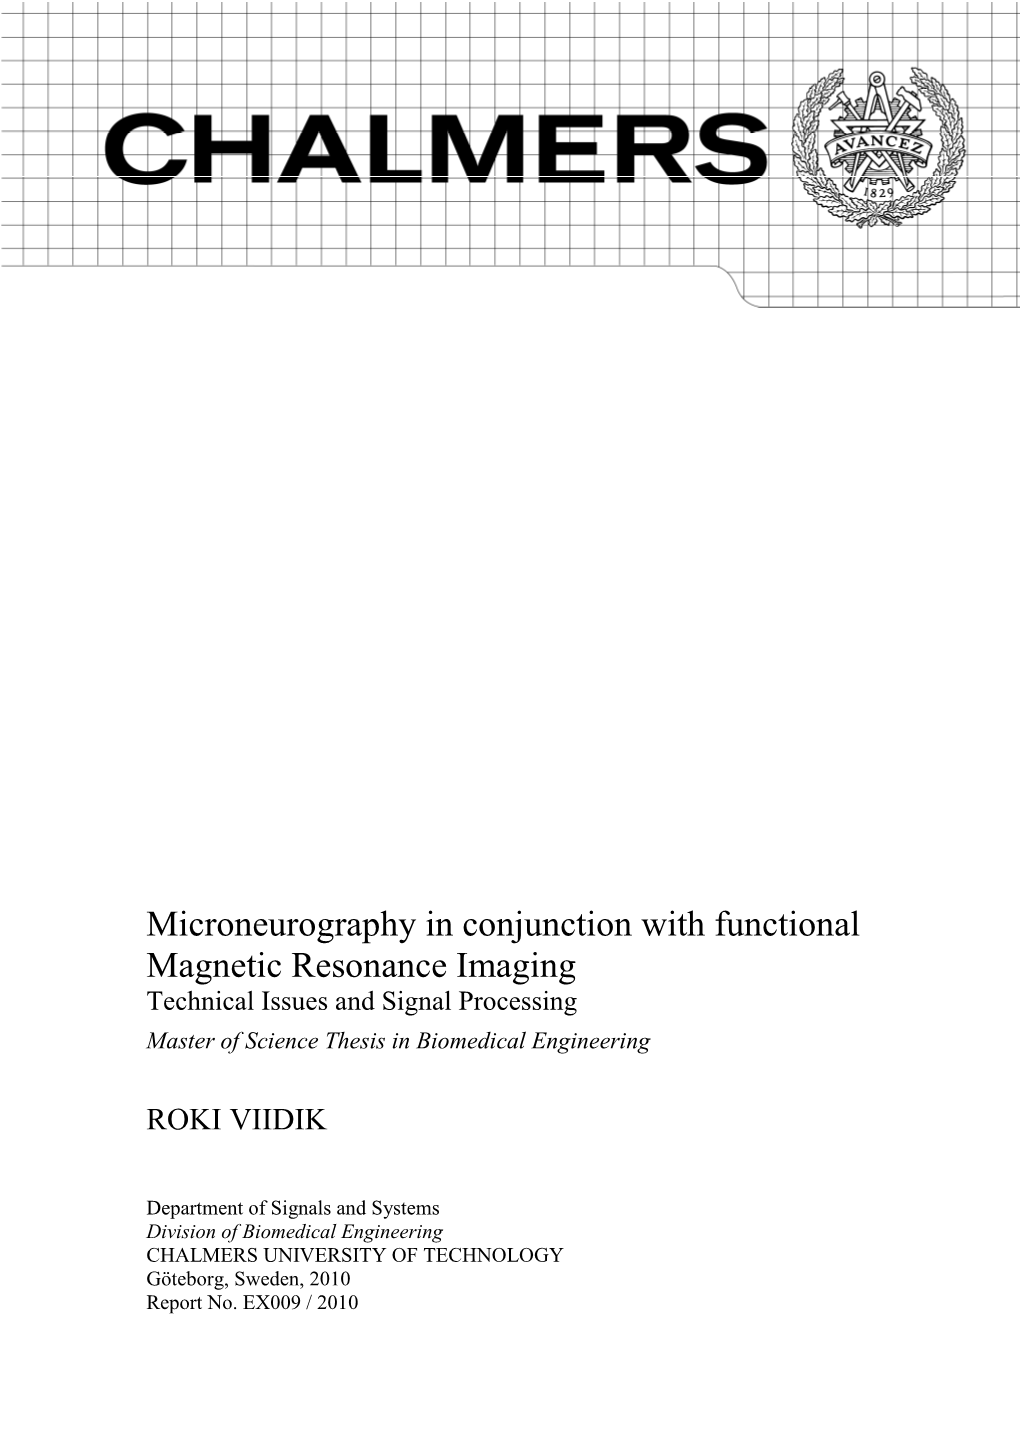 Microneurography in Conjunction with Functional Magnetic Resonance Imaging Technical Issues and Signal Processing Master of Science Thesis in Biomedical Engineering